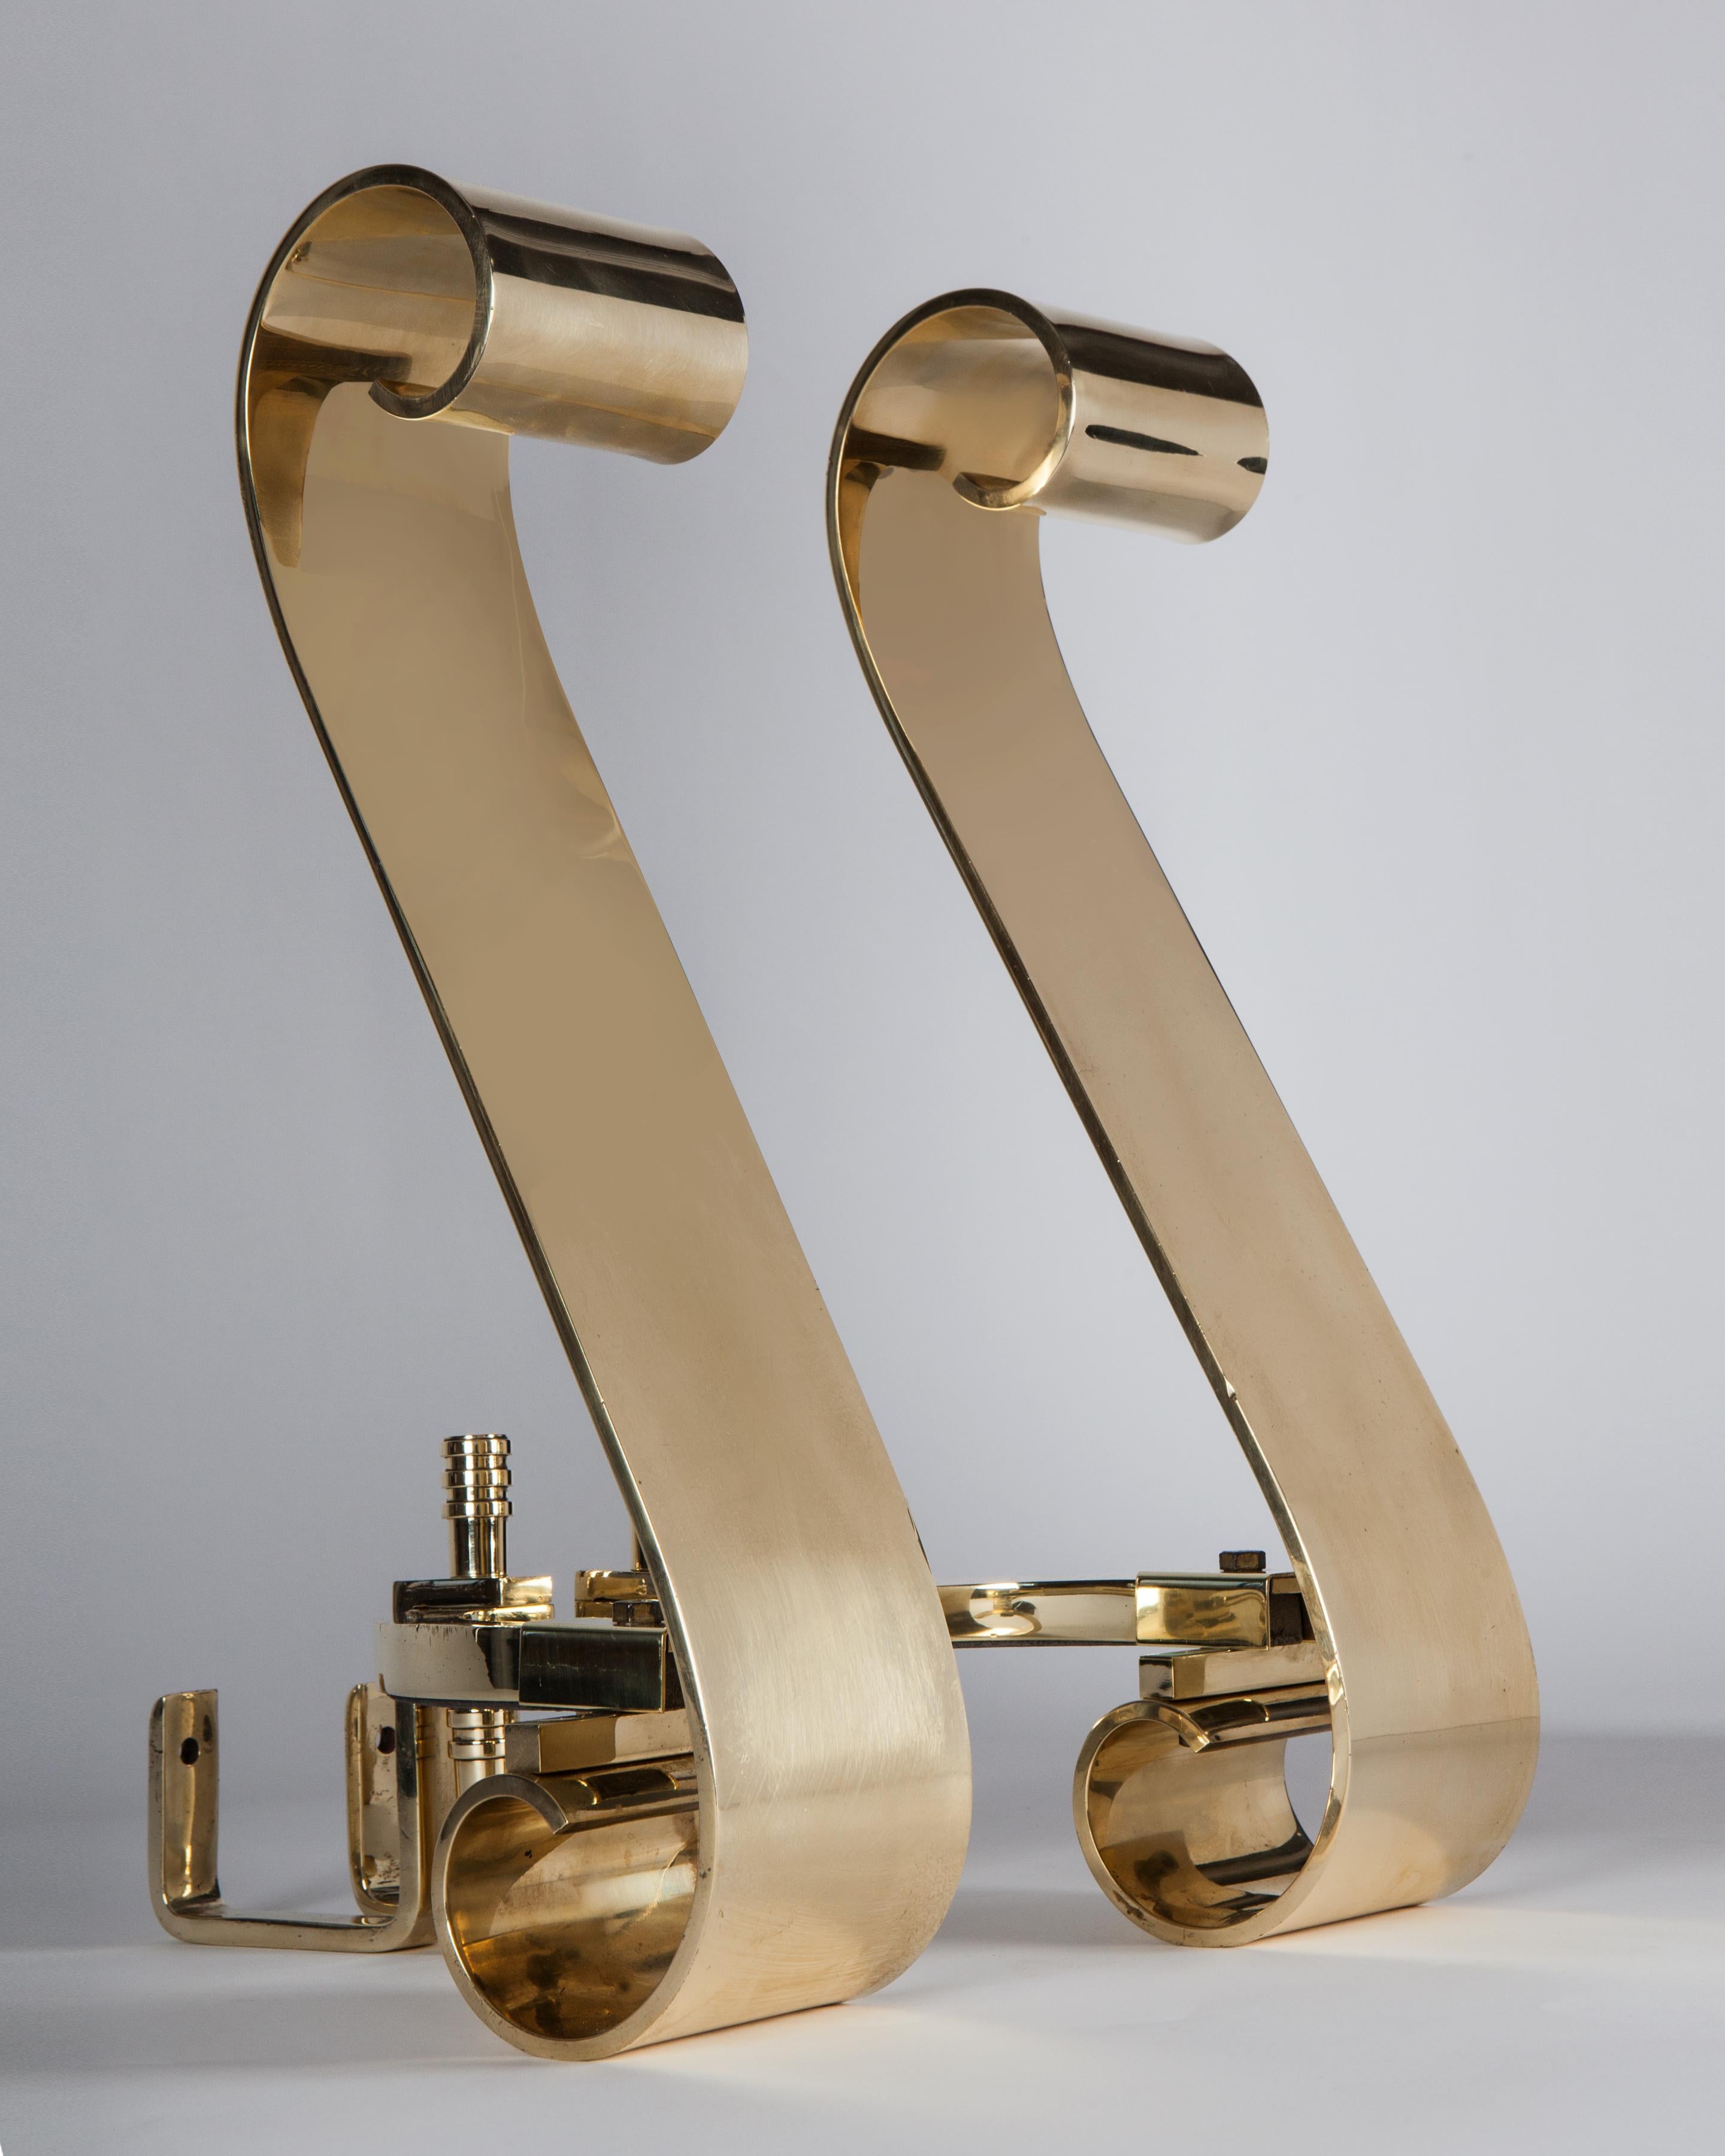 AFP0562
A pair of vintage solid brass andirons in the form of large, wide “S” scrolls with stepped and turned finials and legs.

Dimensions
Overall: 19-1/2